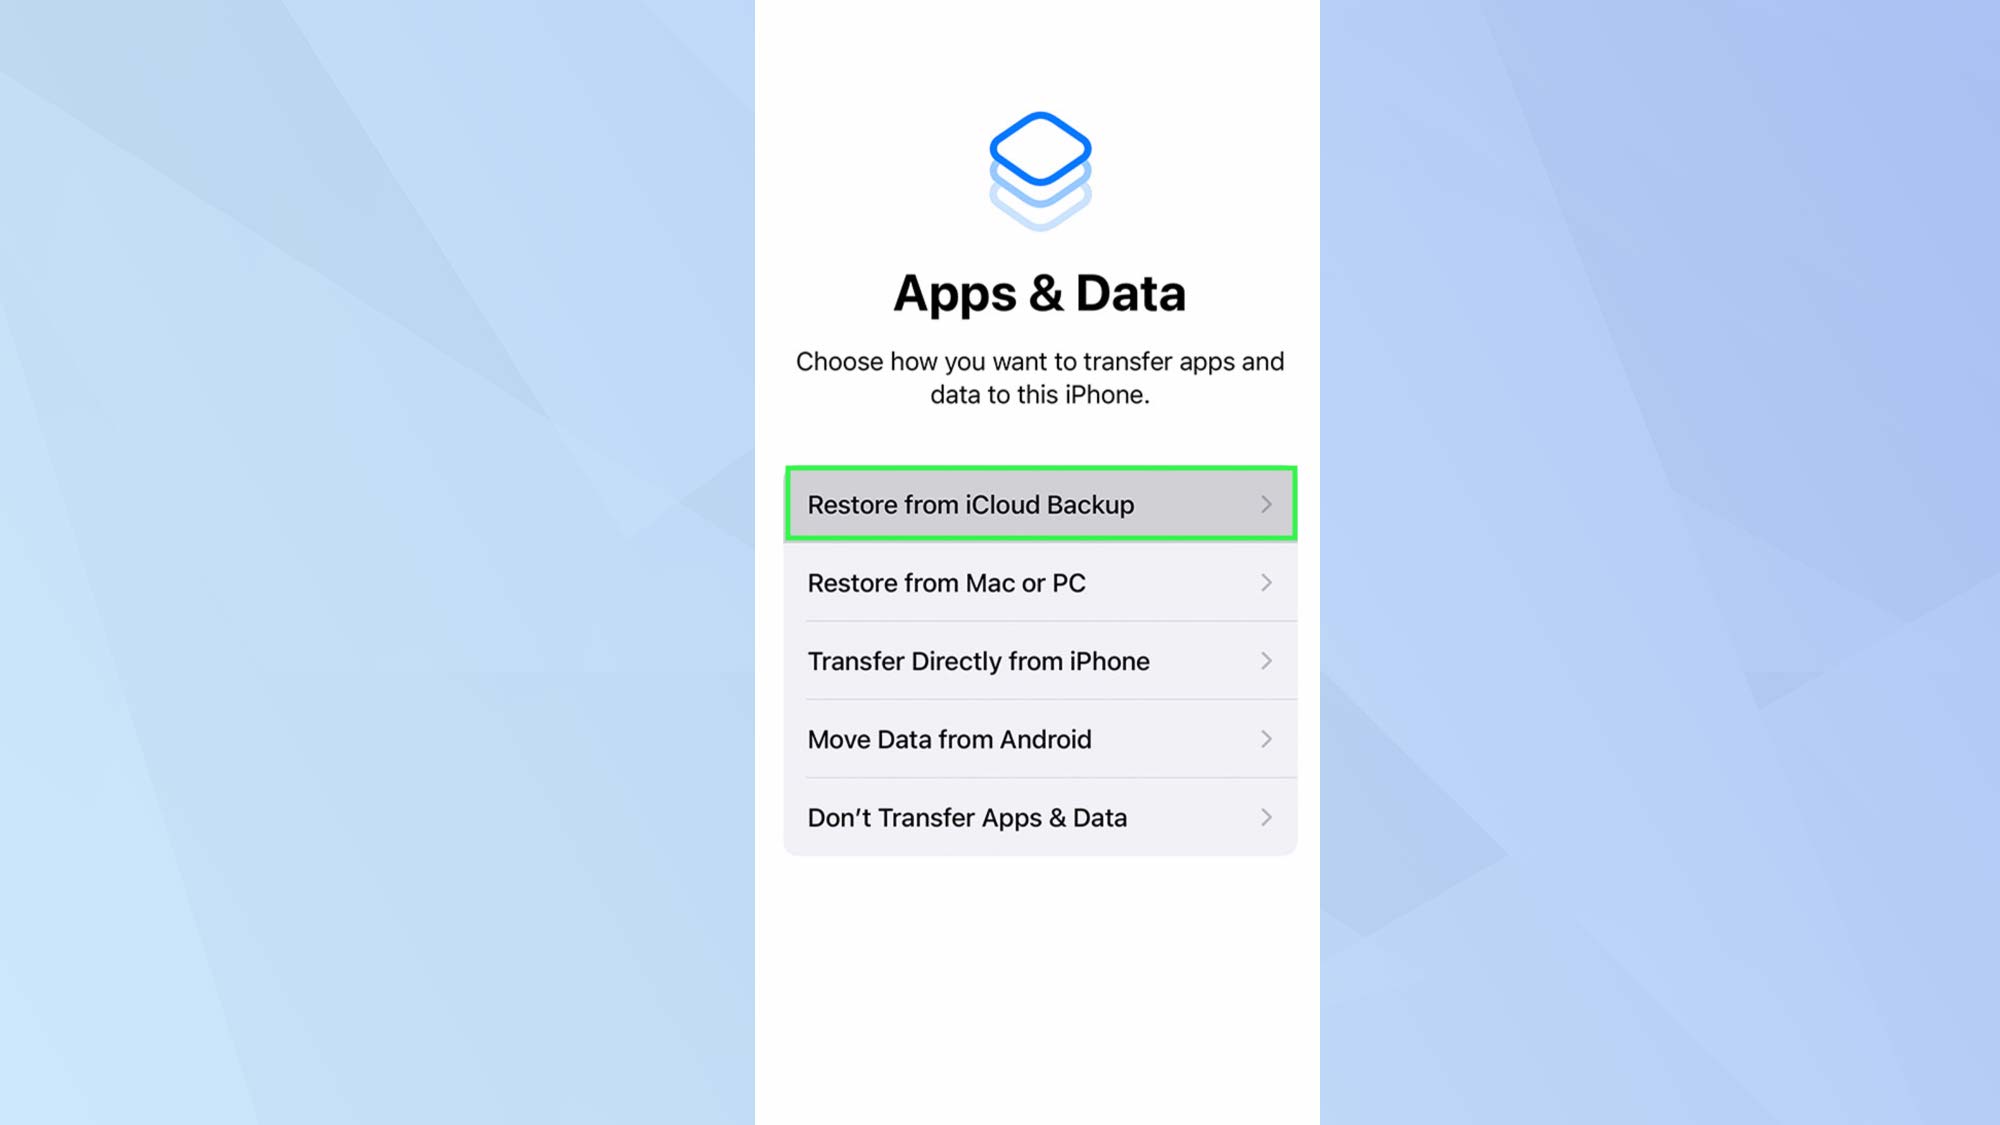 iOS Apps & Data app with Restore from iCloud Backup highlighted